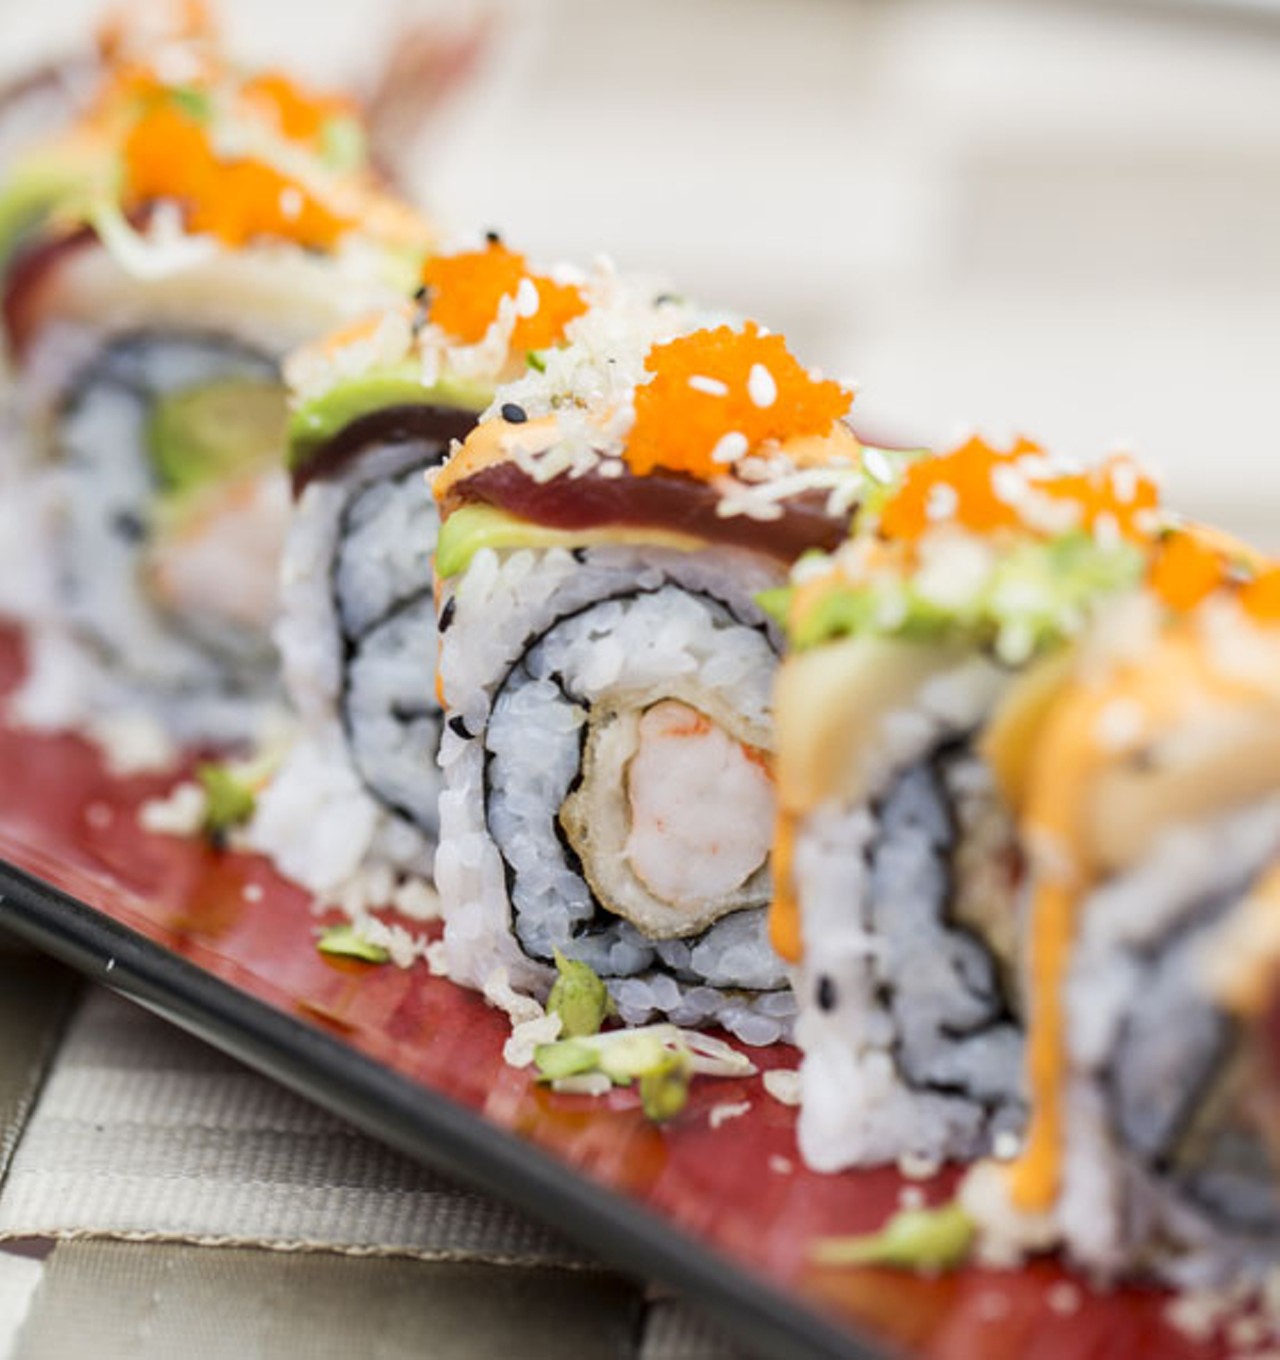 The "Sea Dragon" roll brings fried shrimp tempura, avocado and Japanese mayo. It's all topped with red tuna, white tuna, radish sprouts, masago crumbs, eel sauce and spicy mayo.